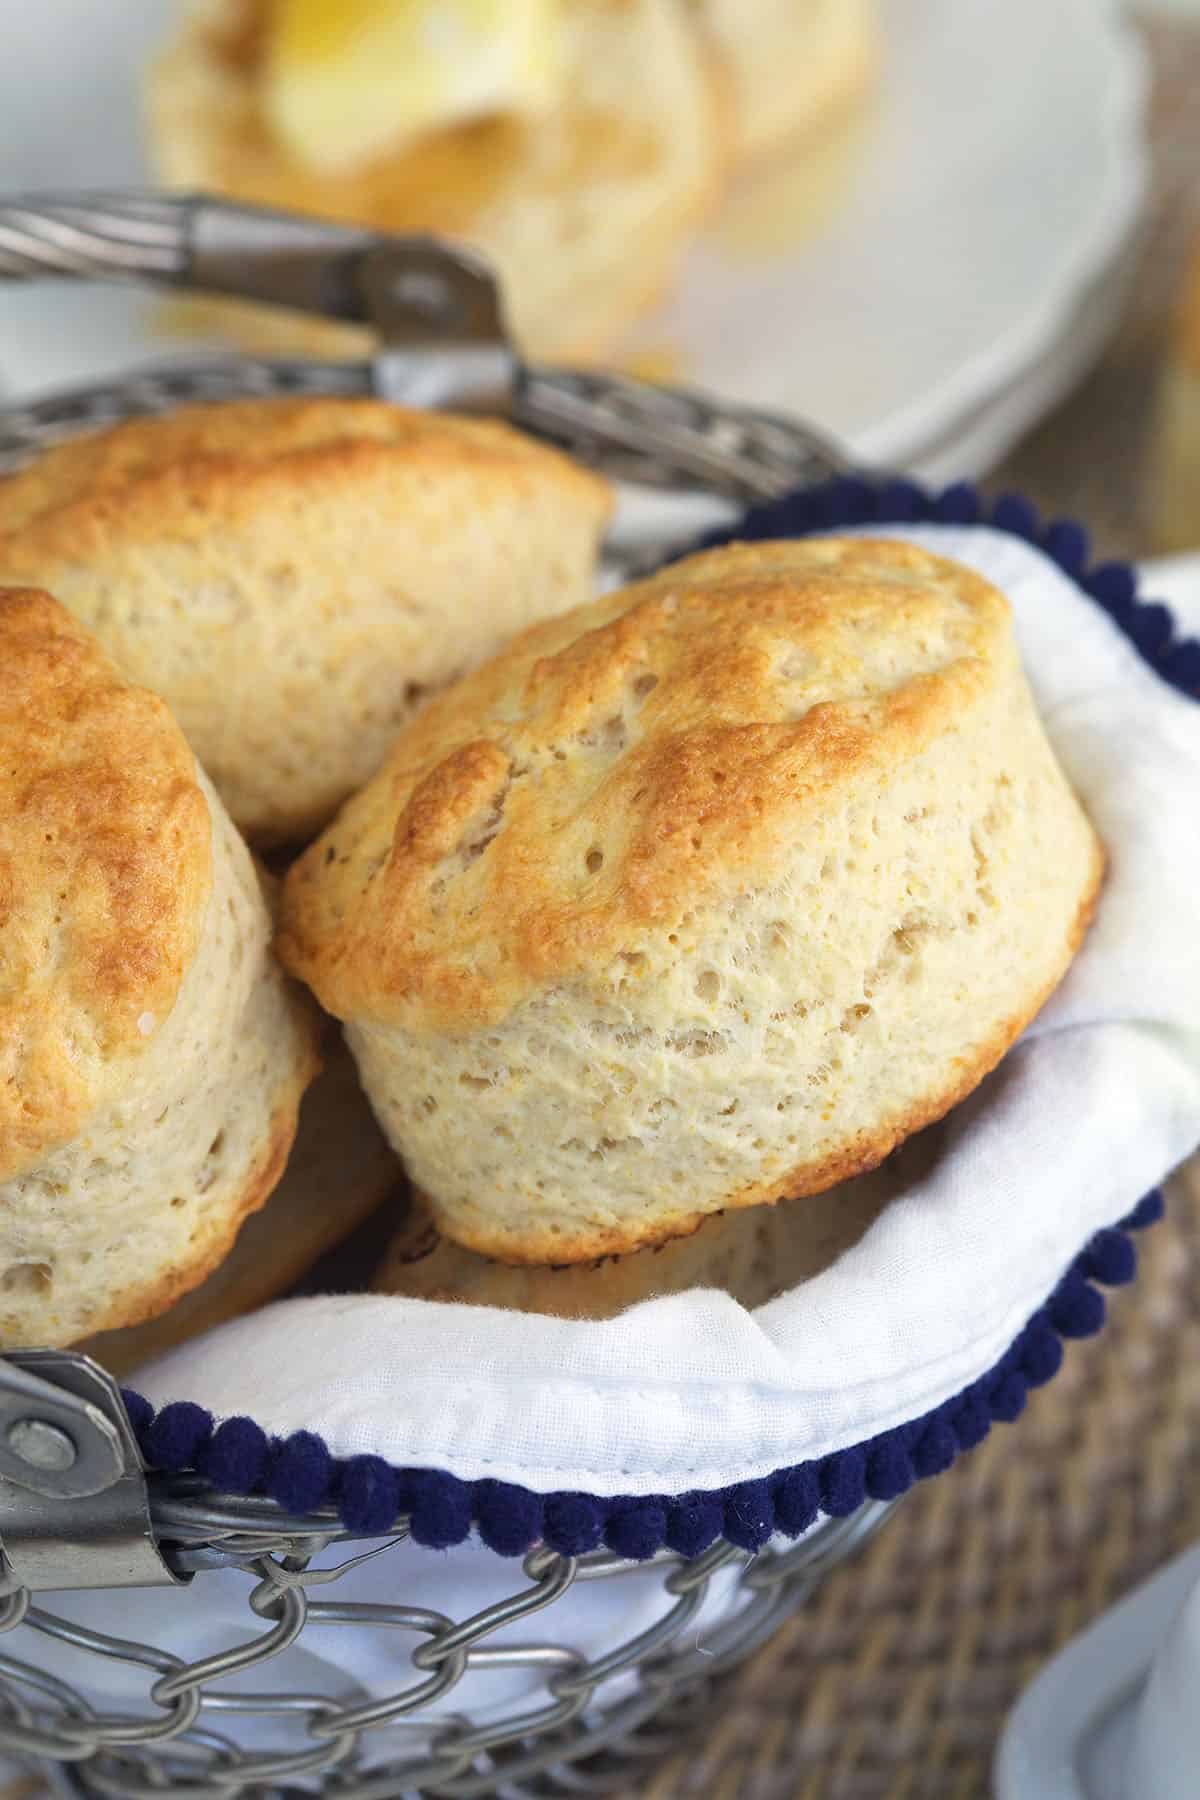 A basket is filled with cooked buttermilk biscuits.